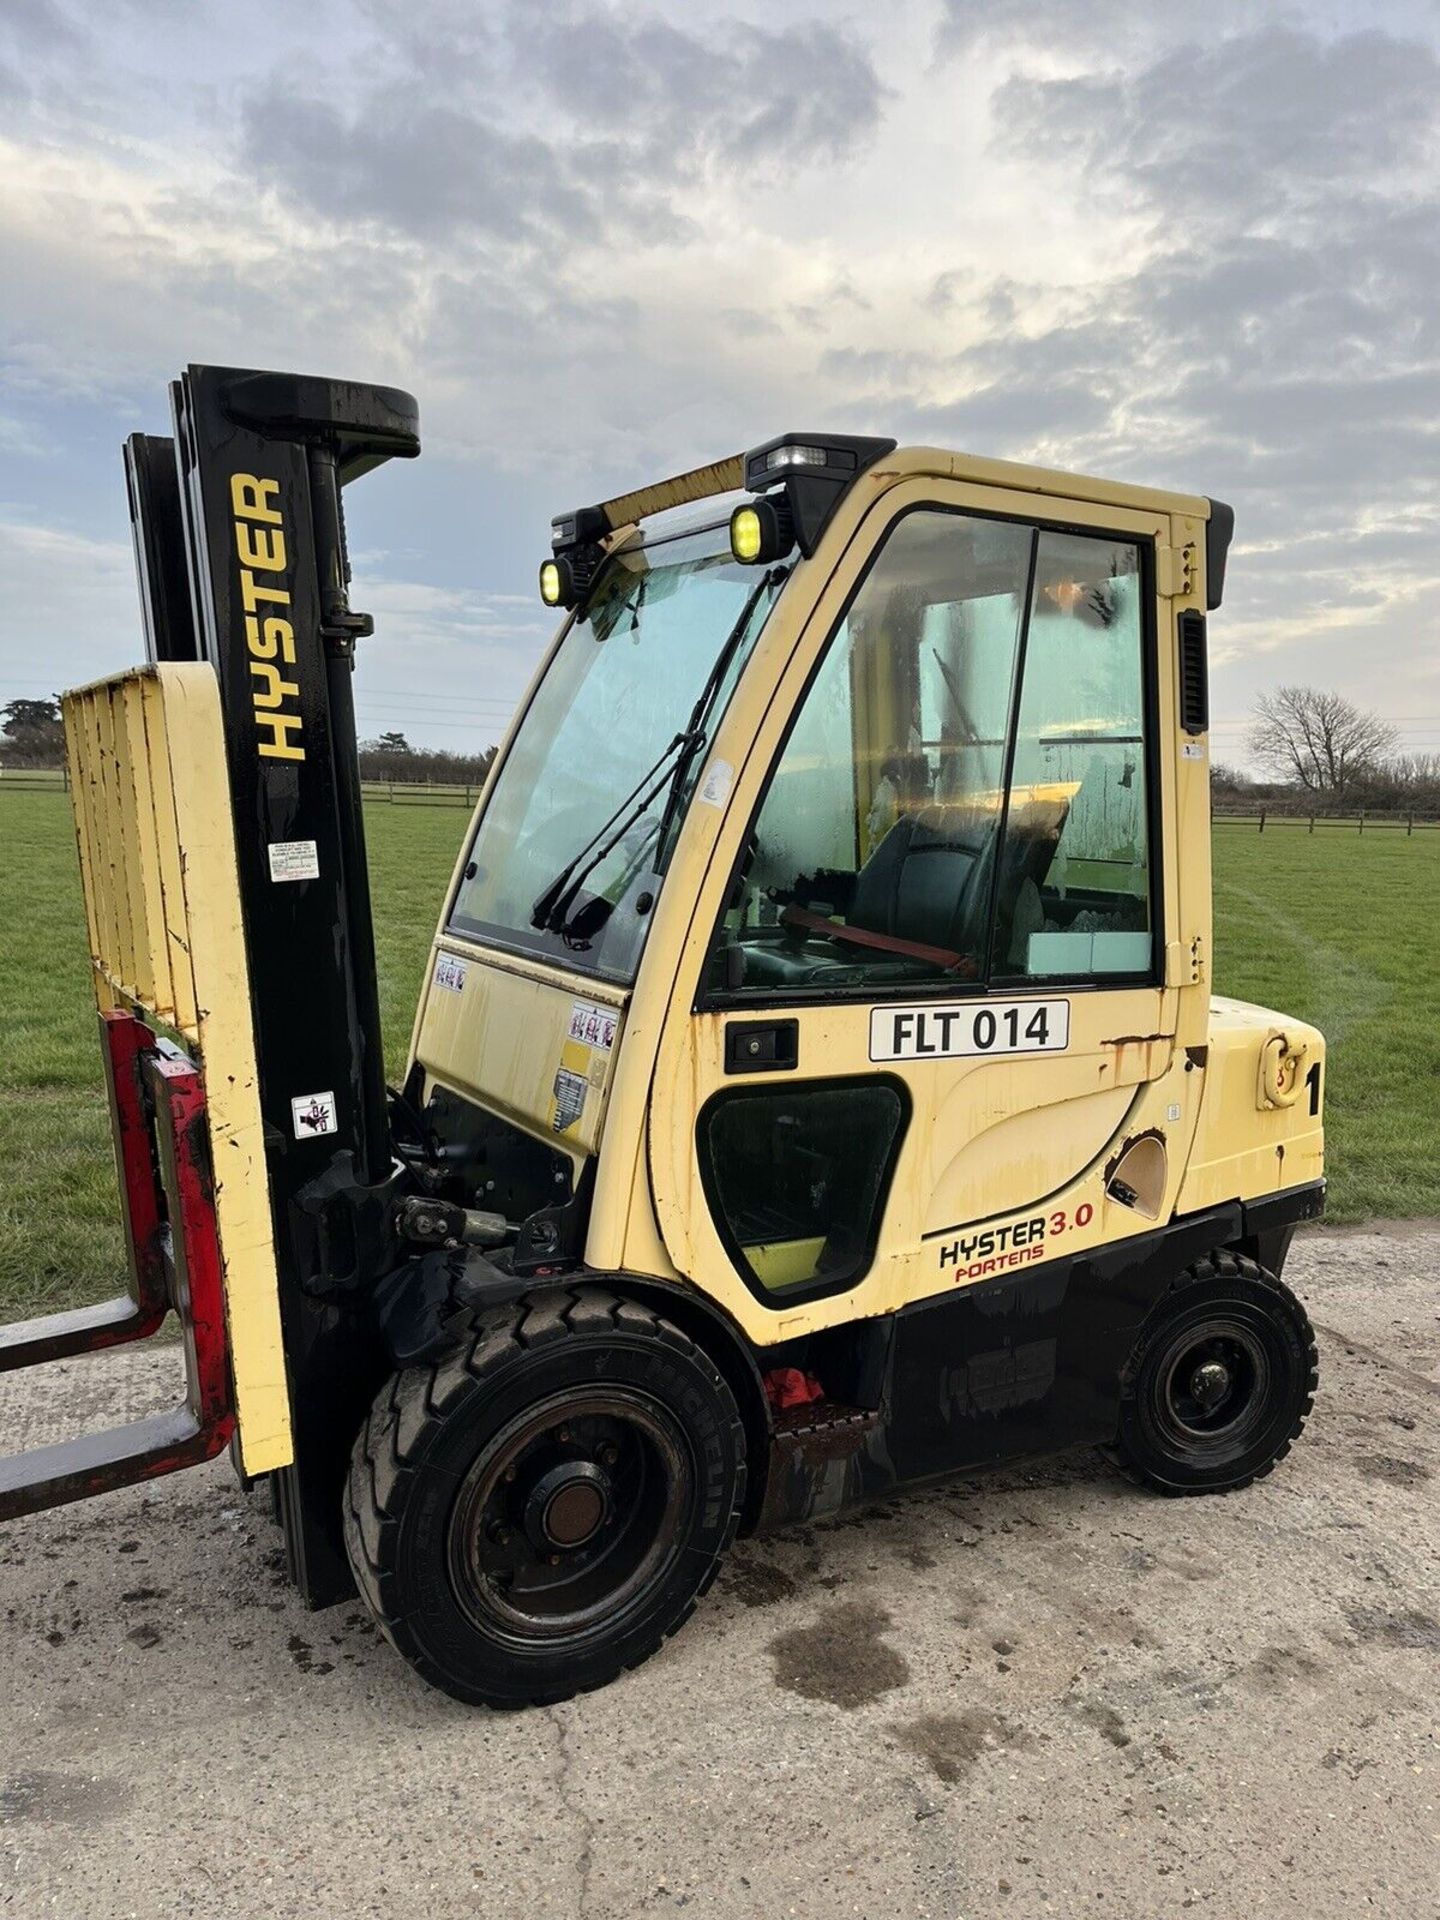 Hyster forklift truck full heated cab